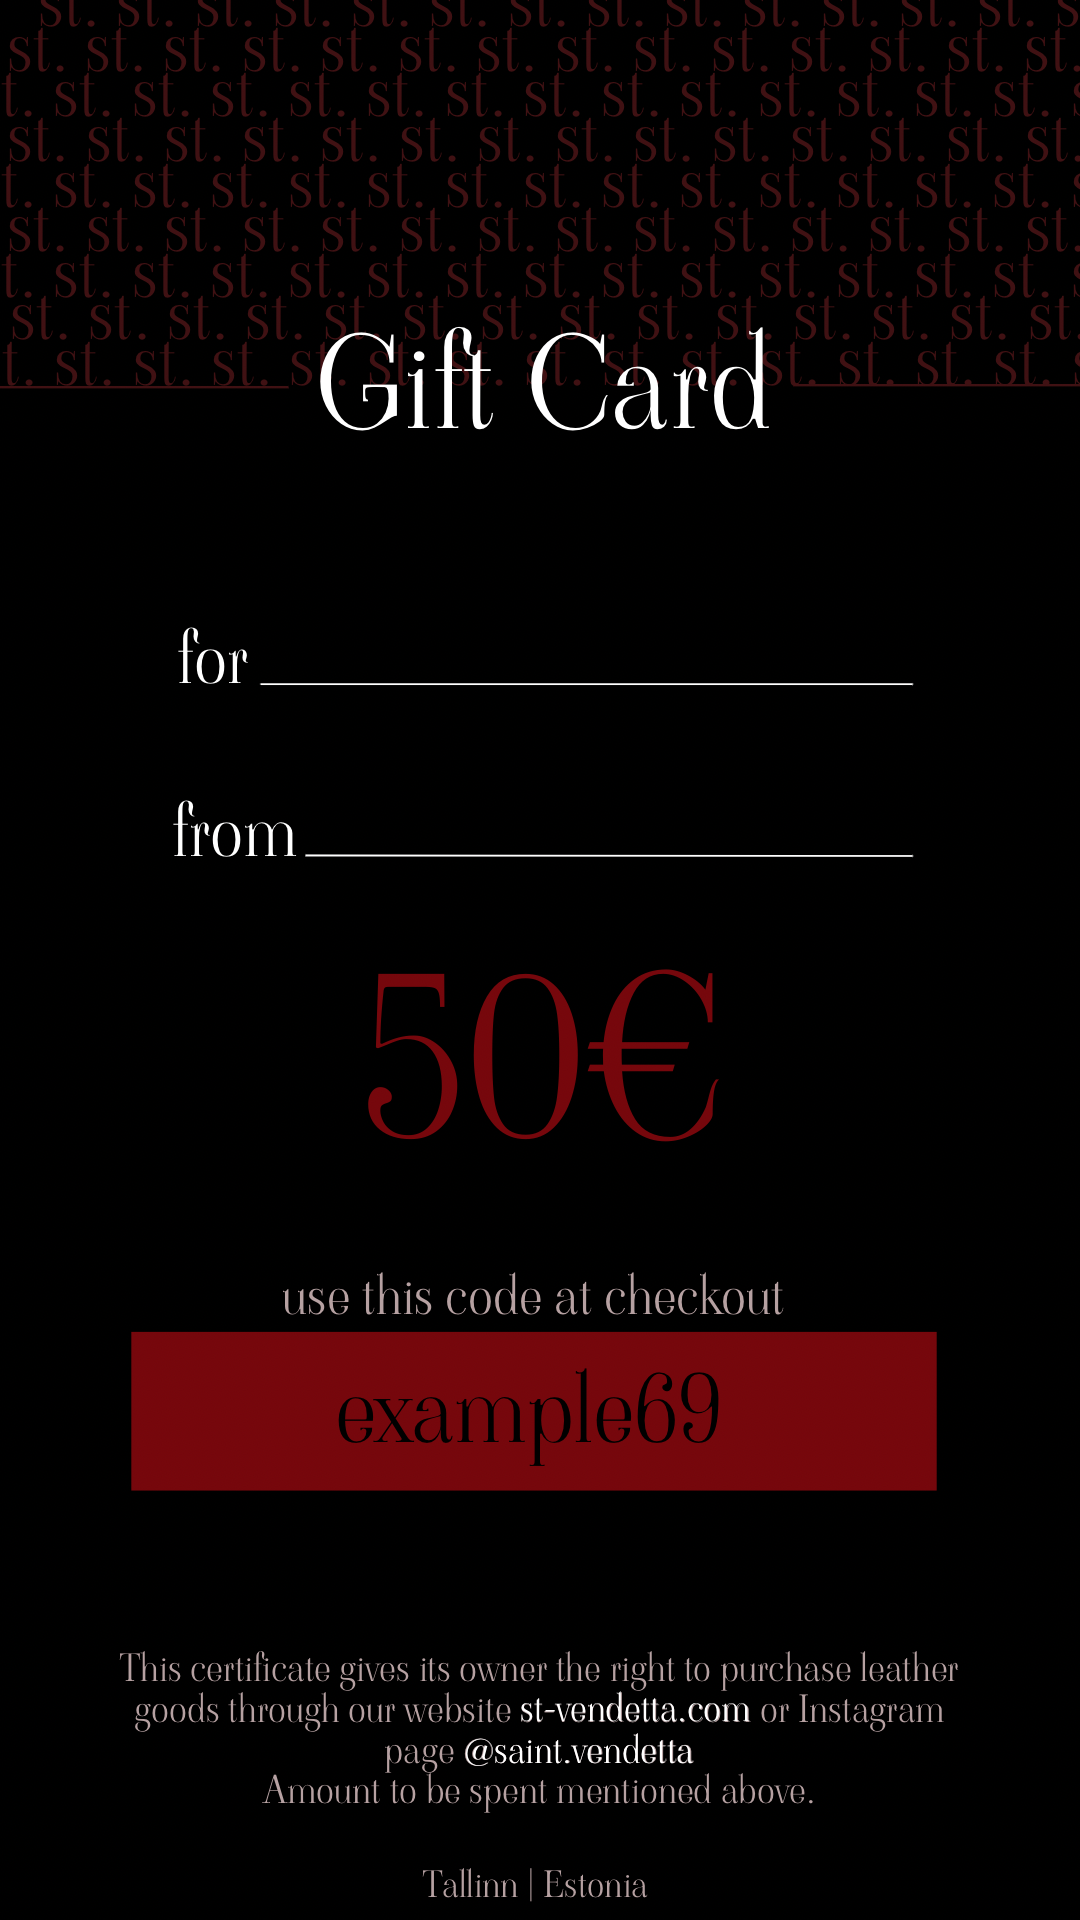 Gift Card for 50€